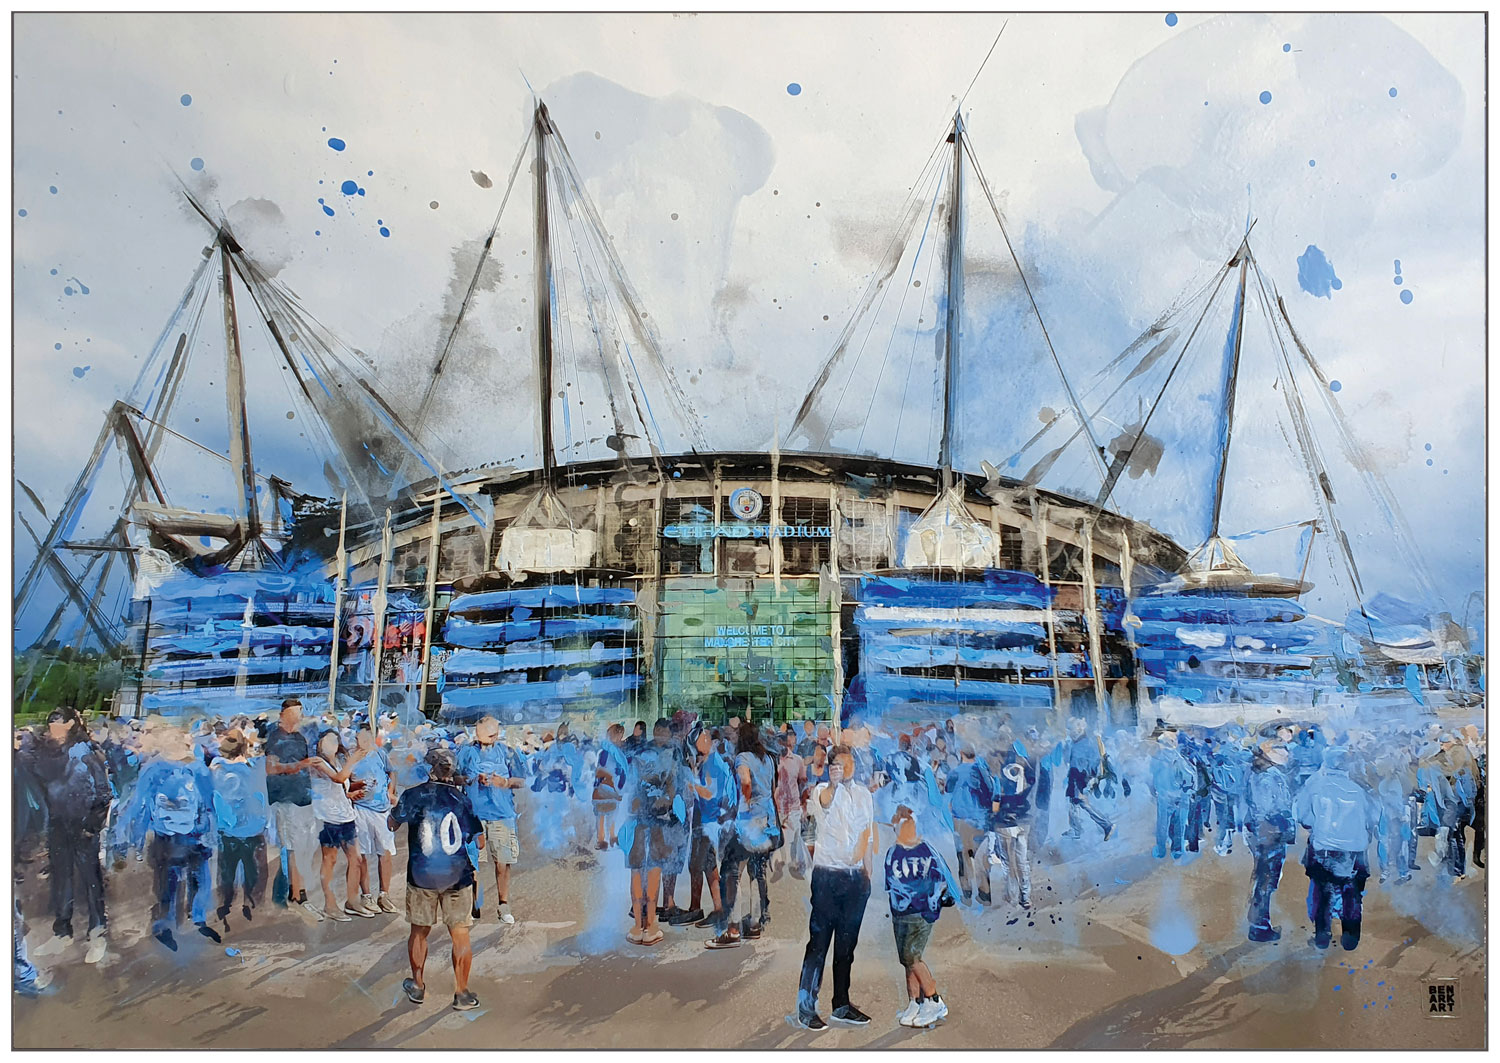 Ben Ark - Cradled in blue shadows at the Etihad